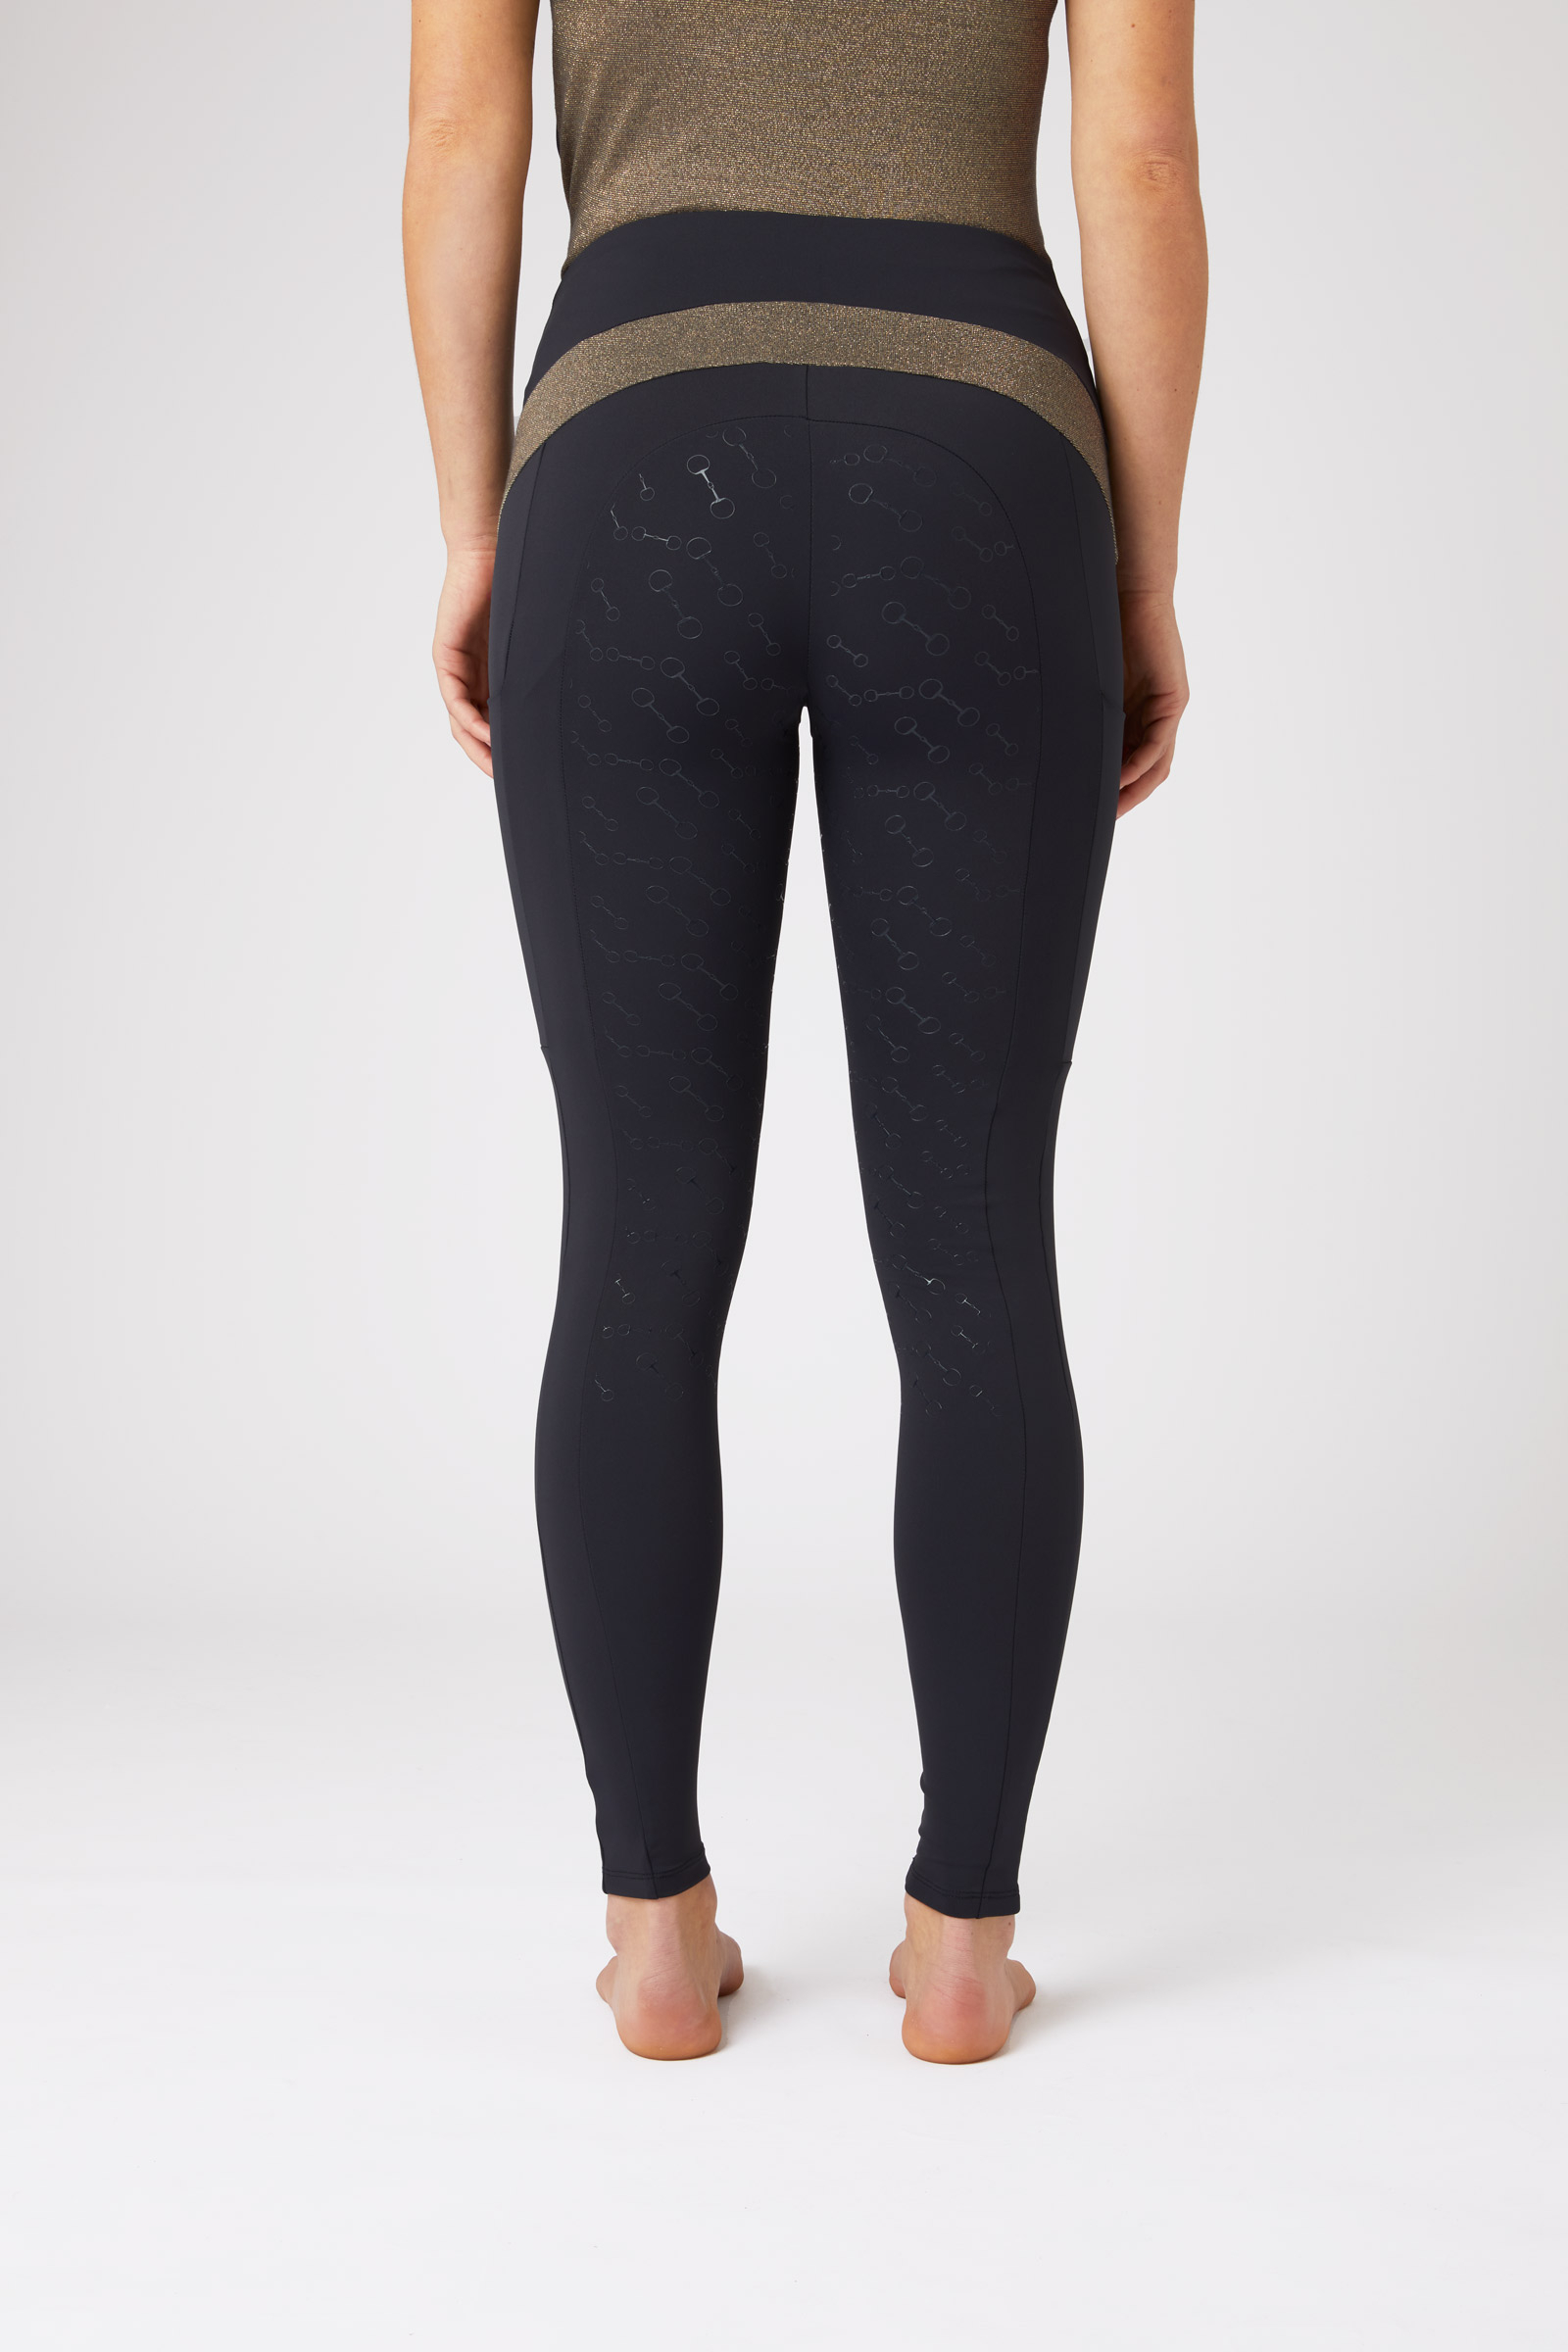 Women's Glyder Directional Tights